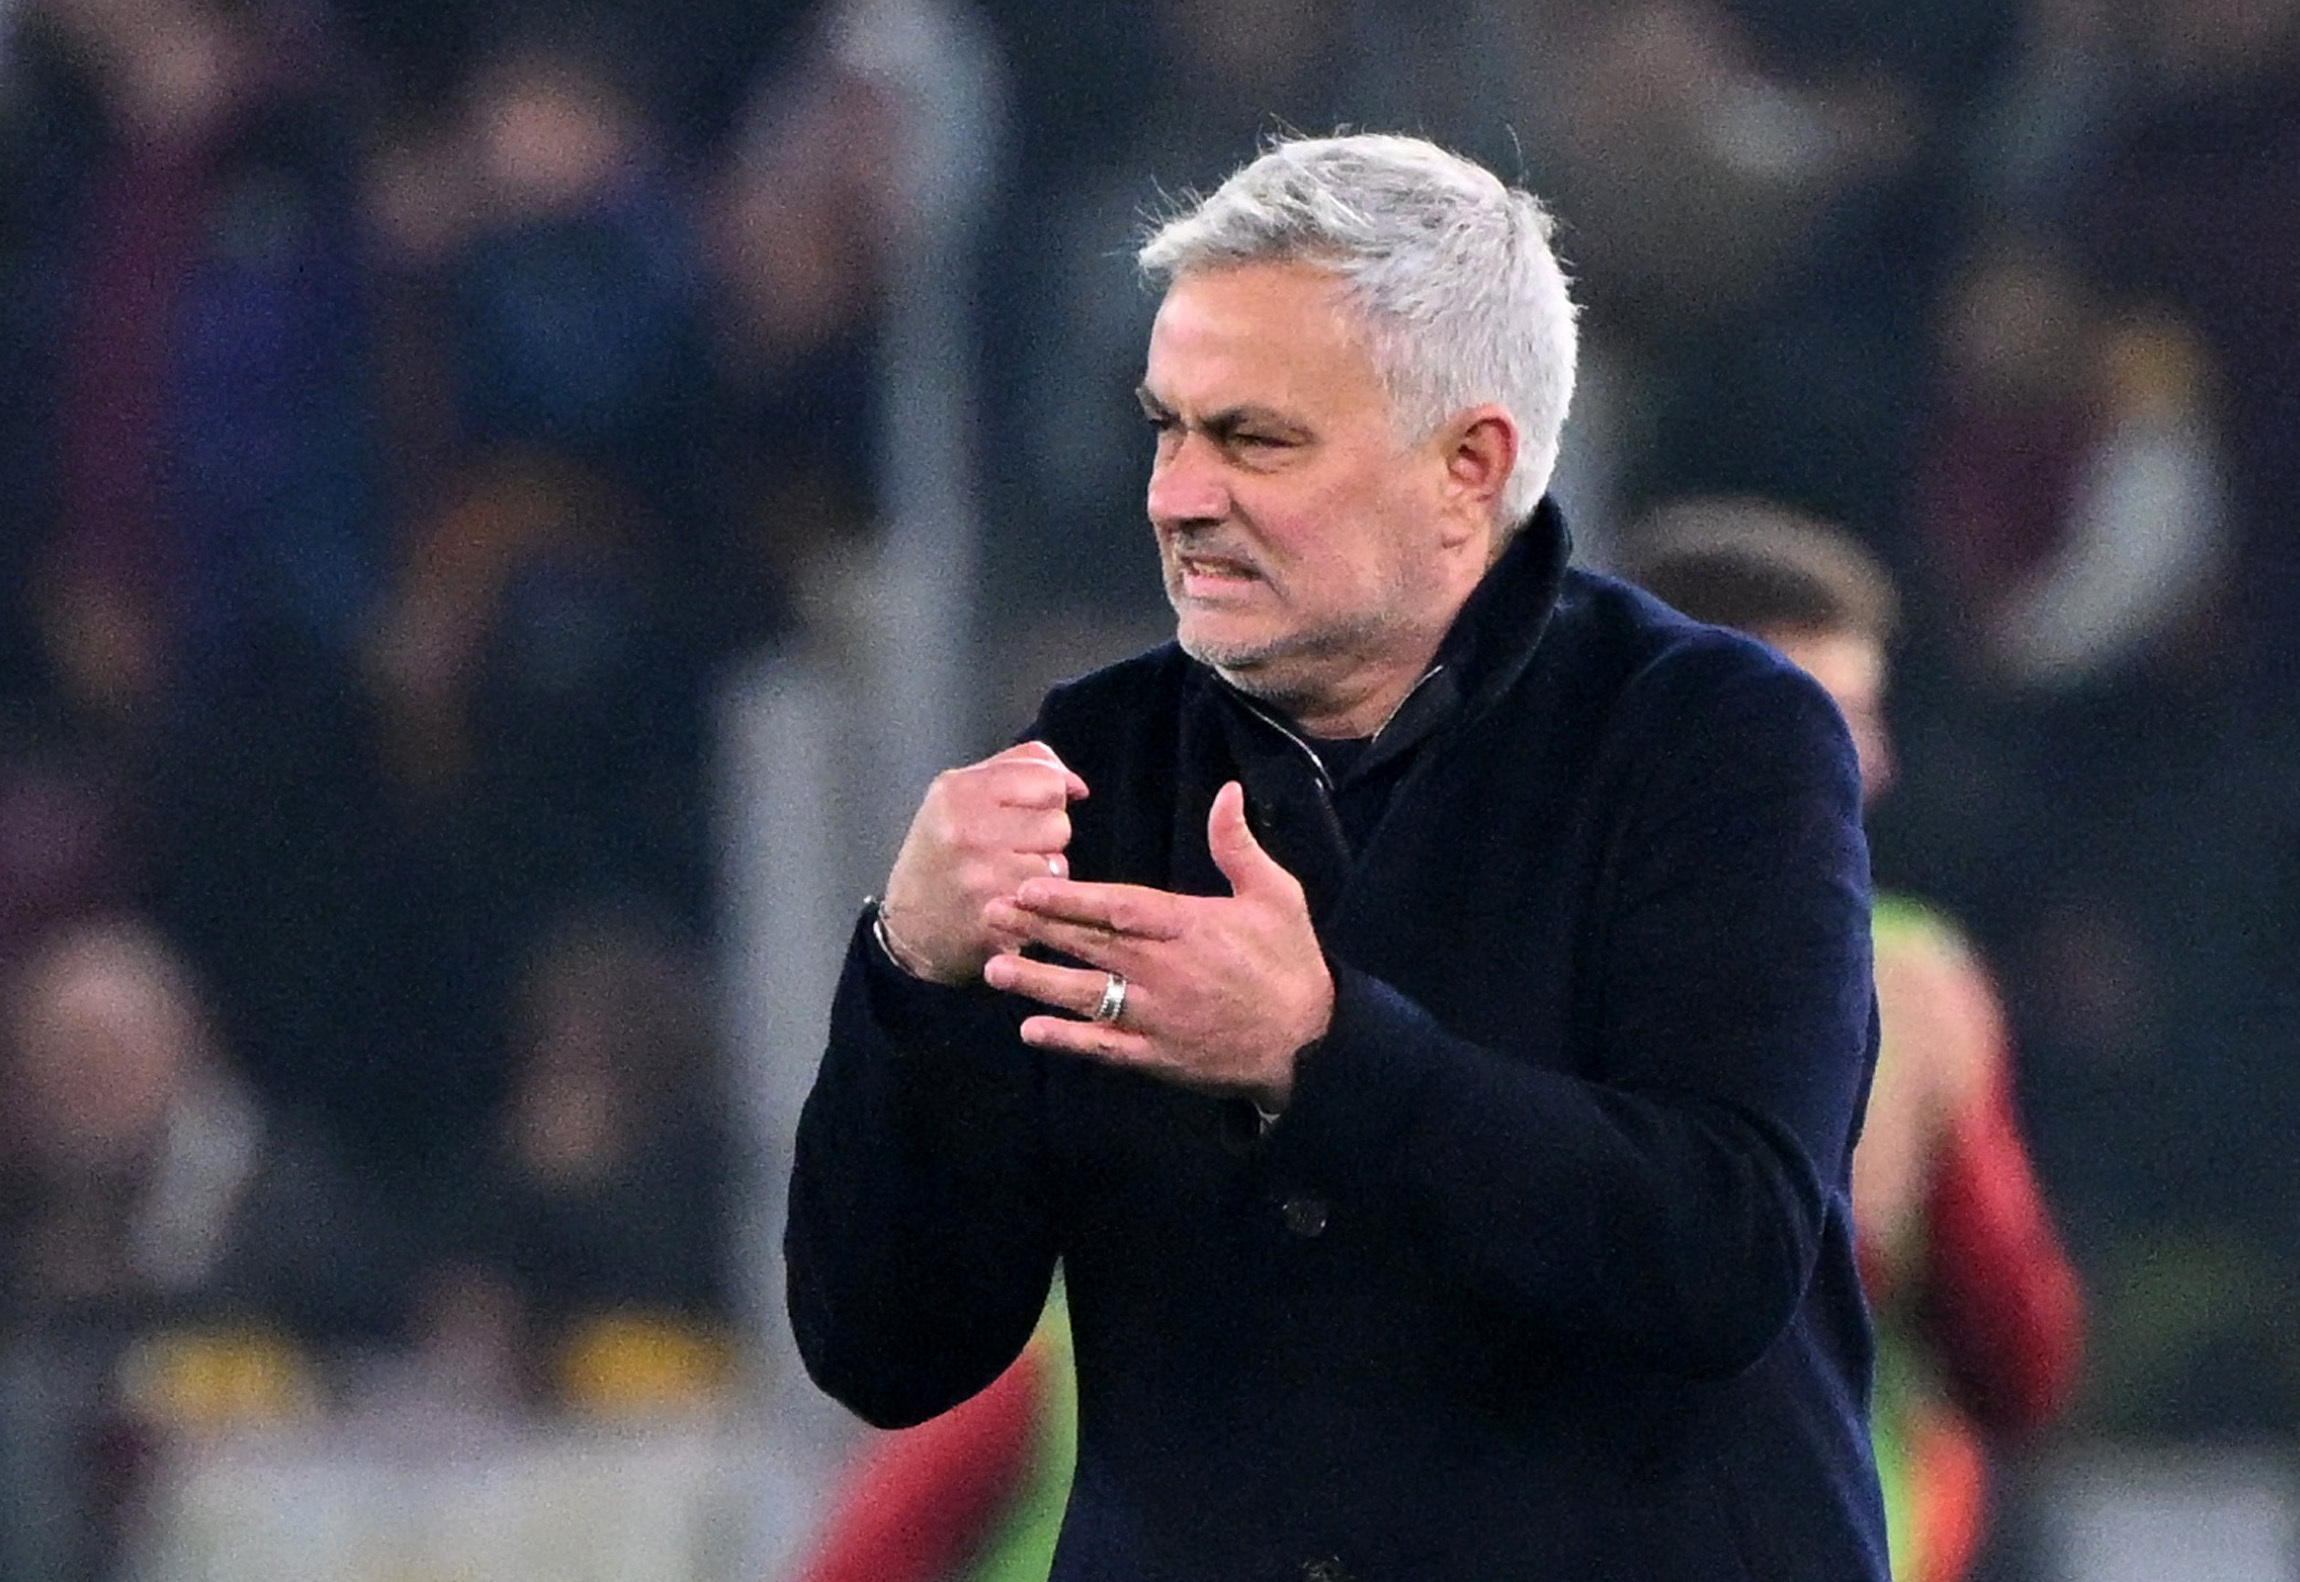 Roma coach Mourinho loses appeal against two-game suspension | Reuters